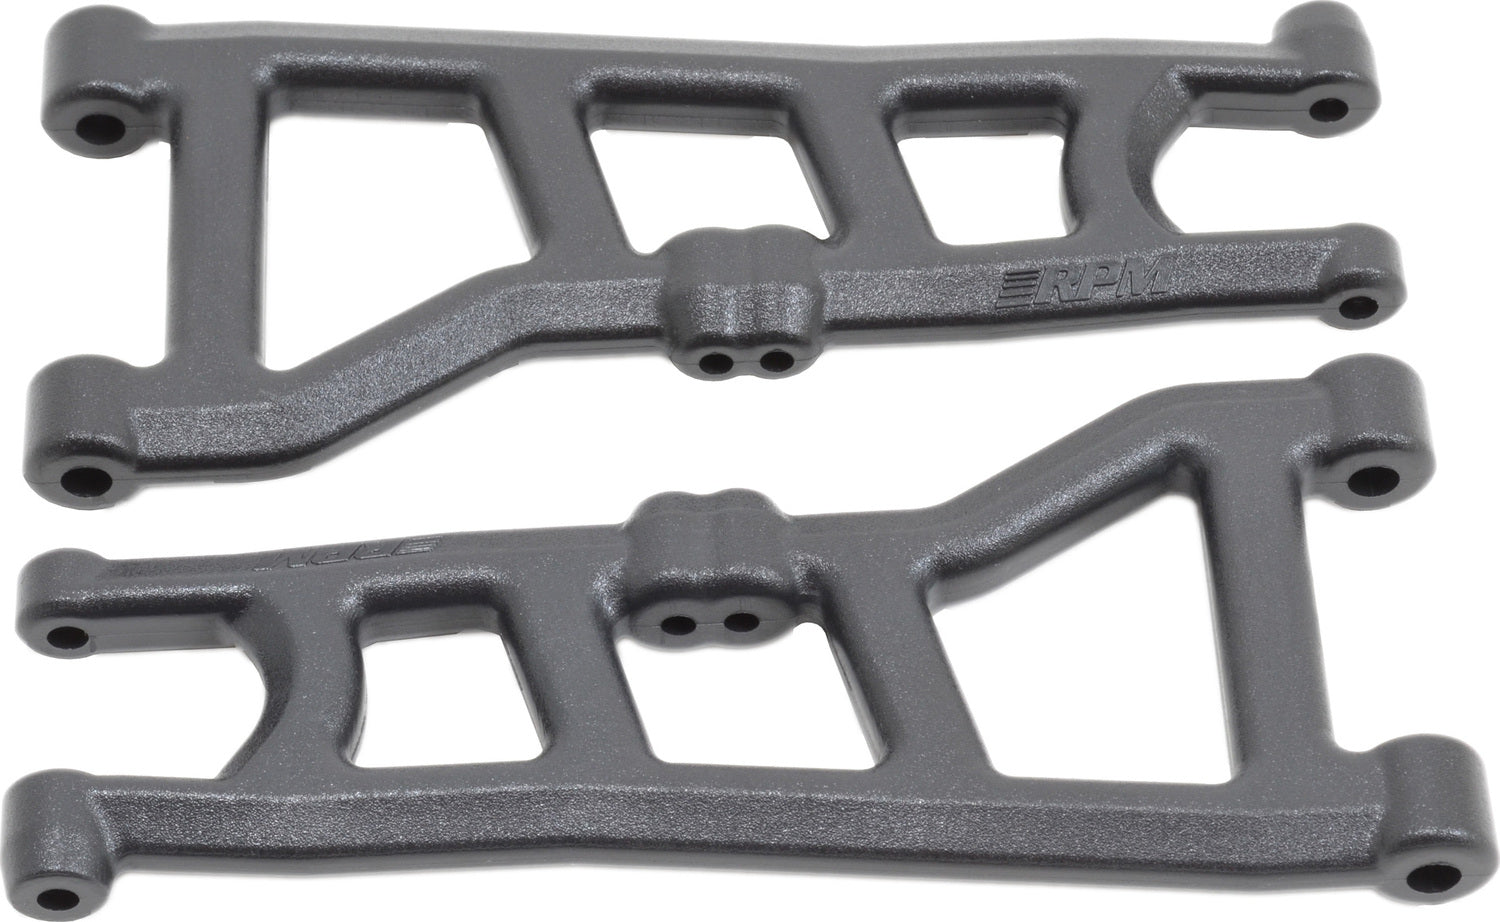 Front A-arms for Arrma Typhon 4x4 3S BLX